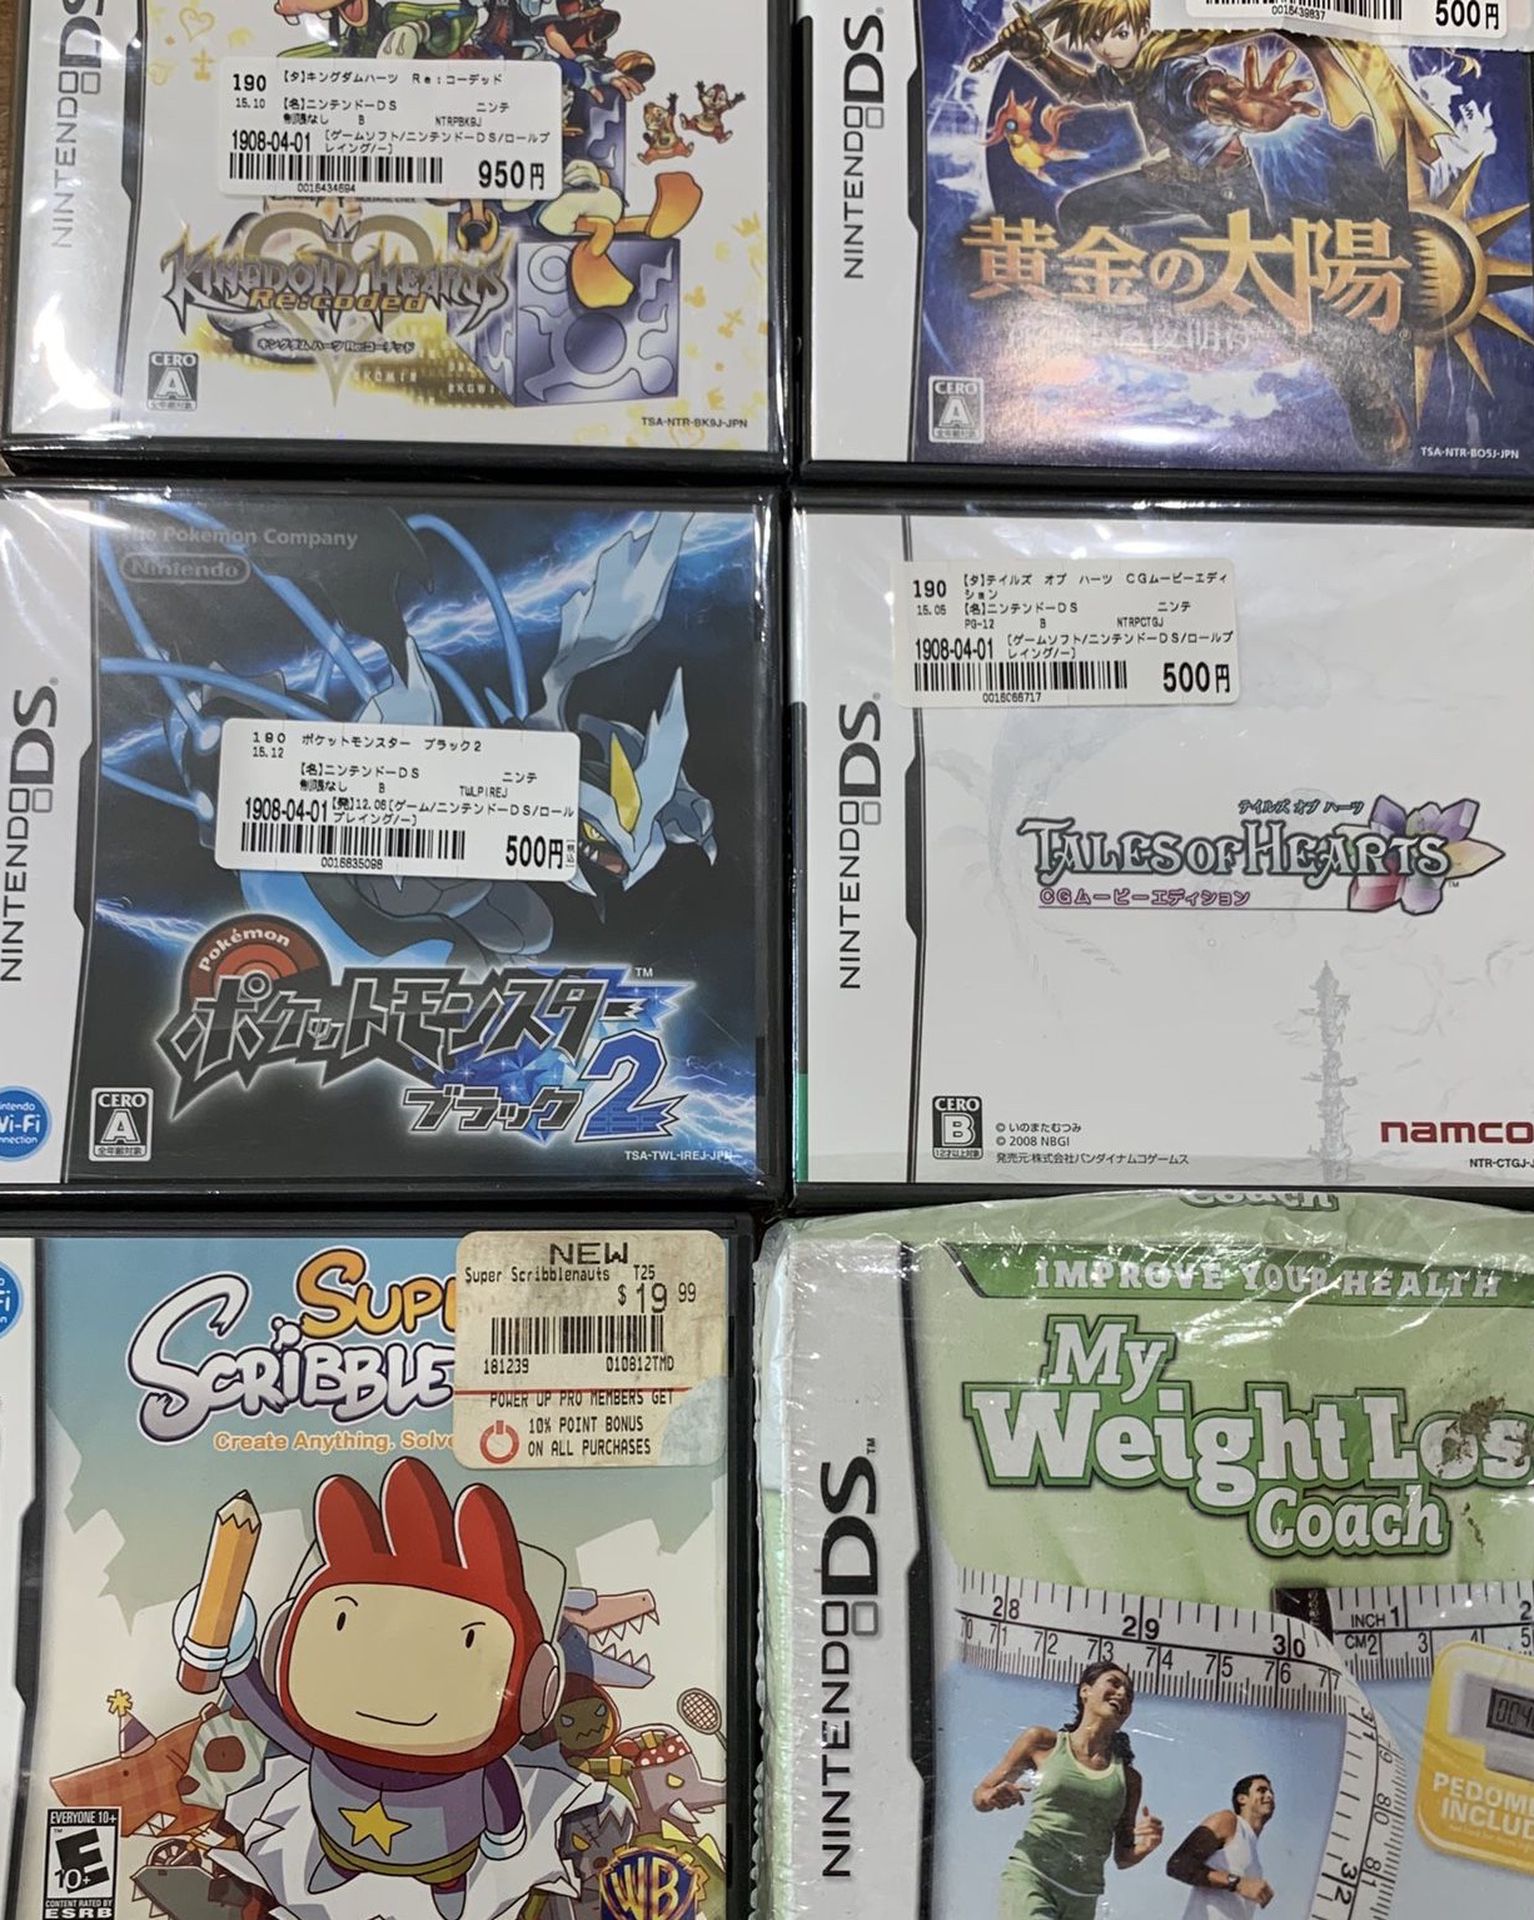 Nintendo DS, 3DS, Gameboy, and Gameboy Advance Games (Read Description for Prices)